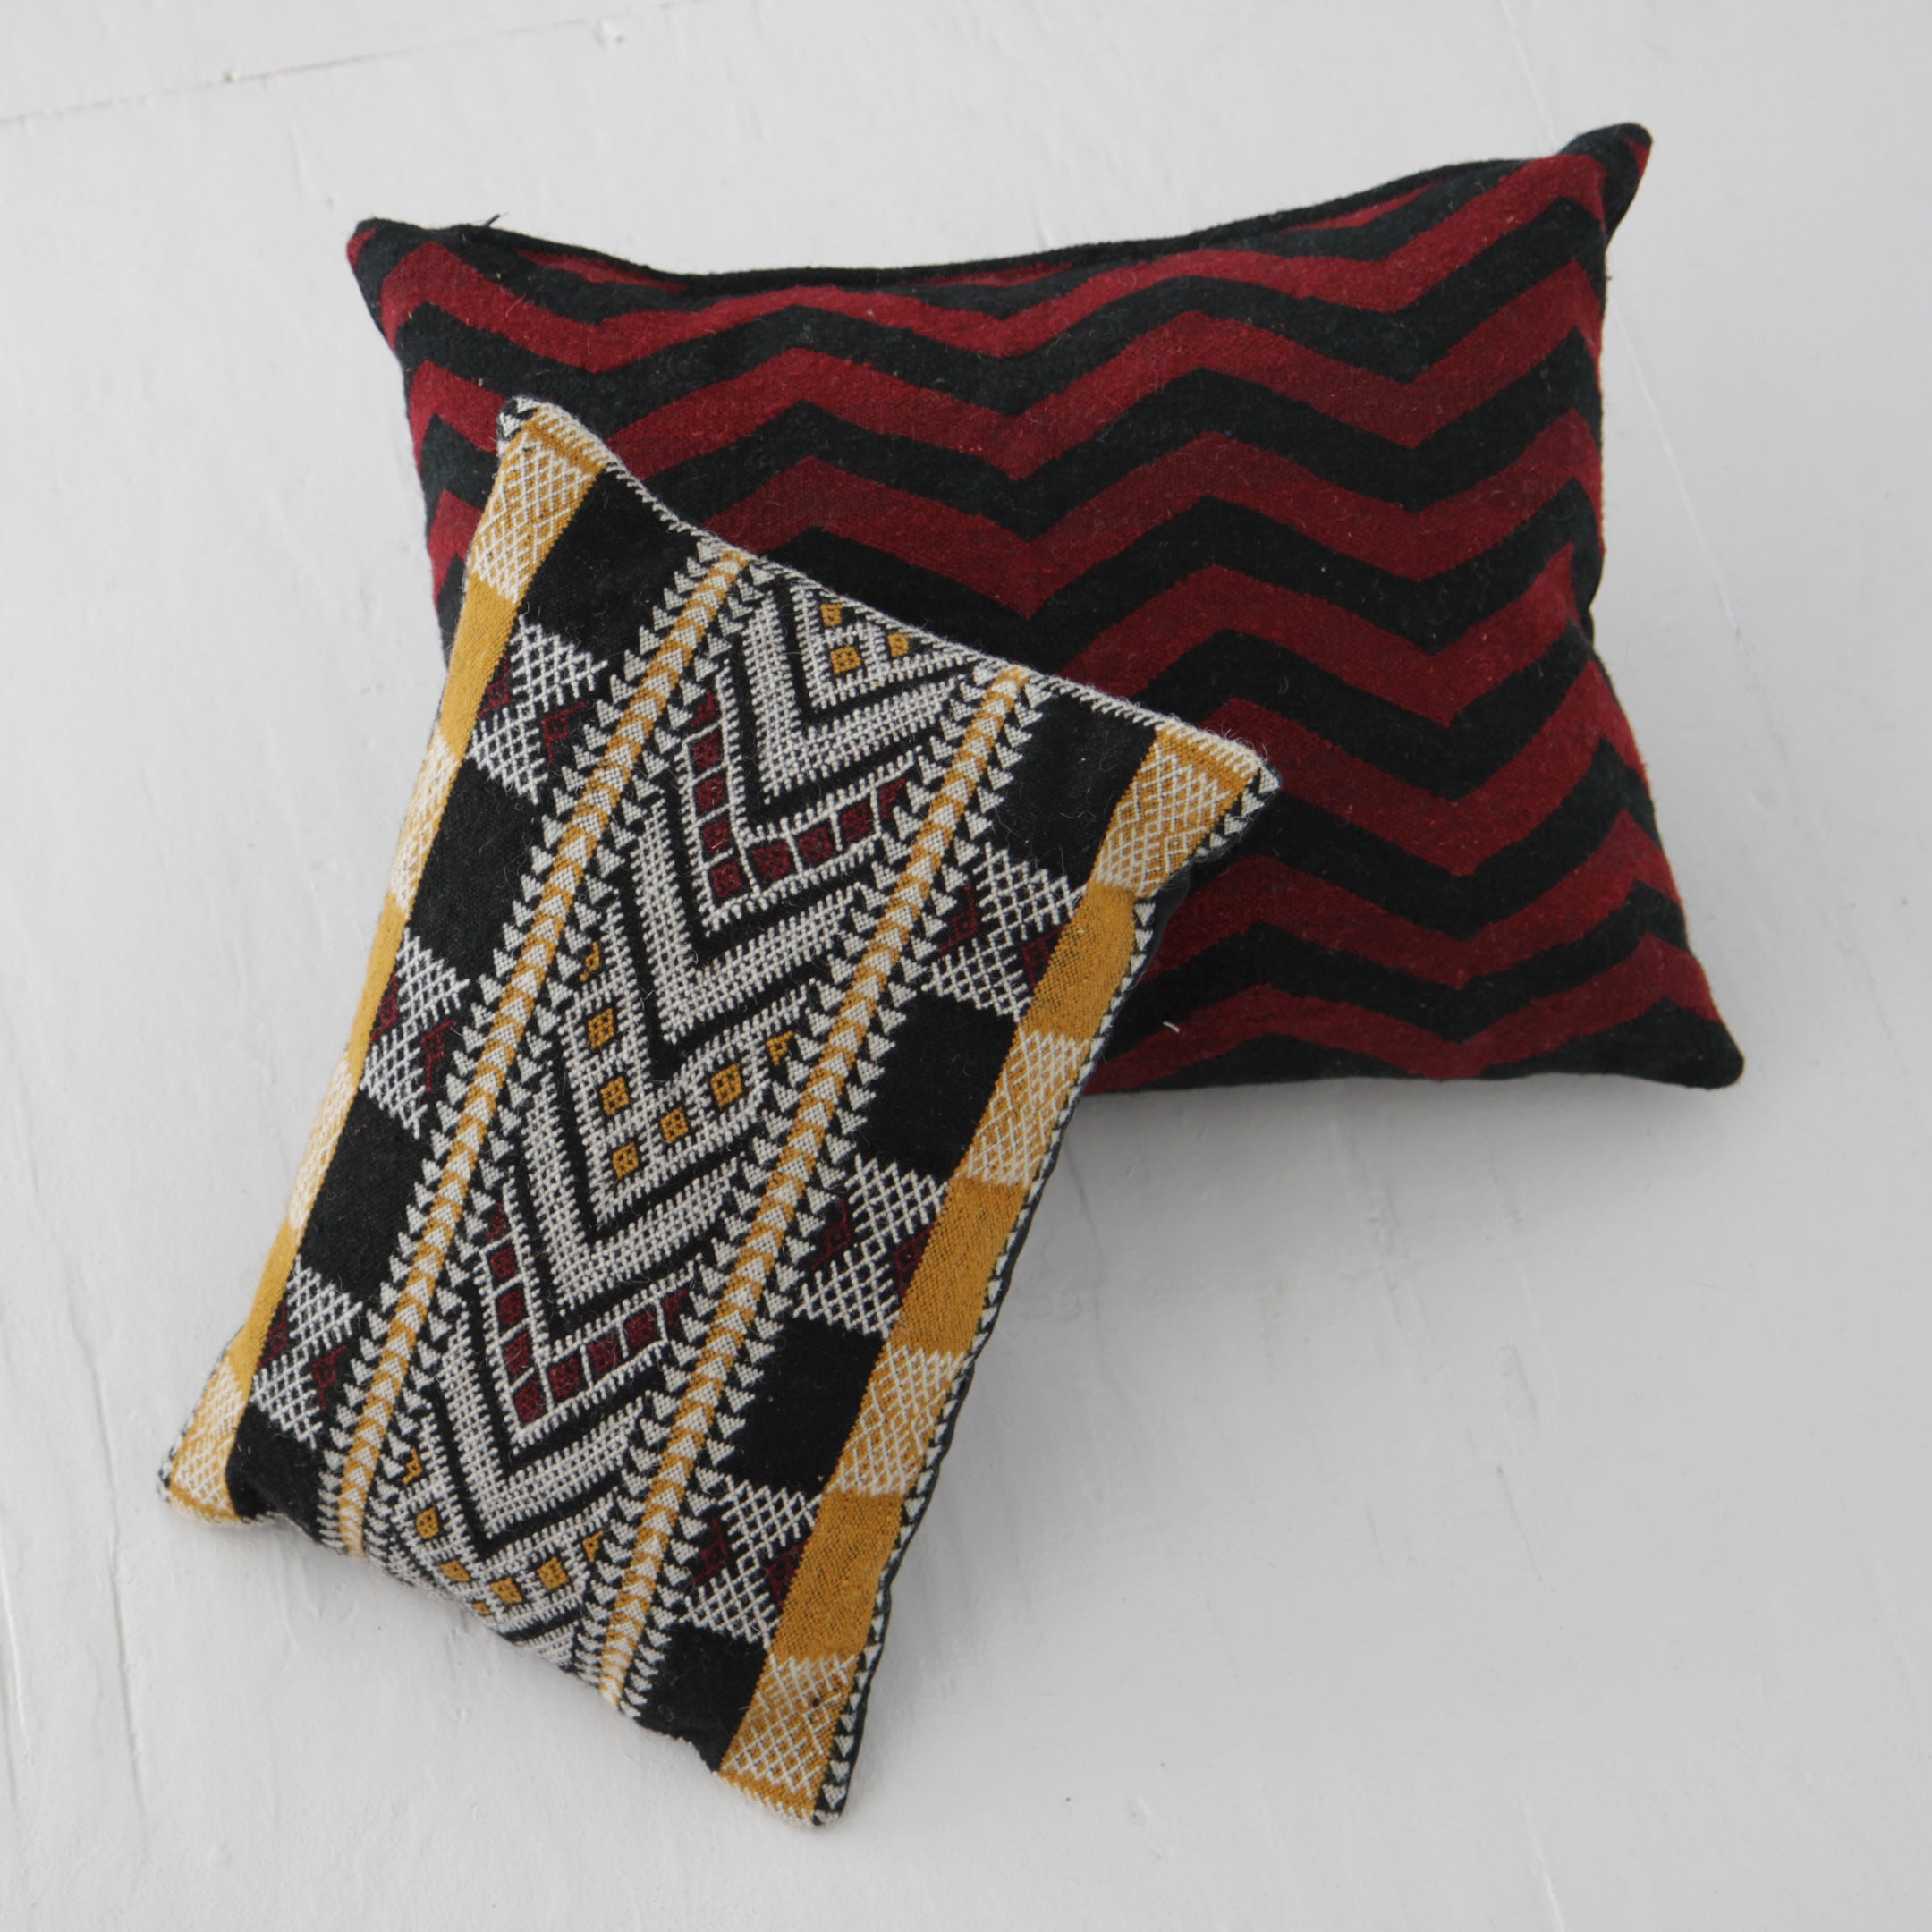 Black and mustard Moroccan pillow paired with simple geometric pillow in red and black zig zag pattern